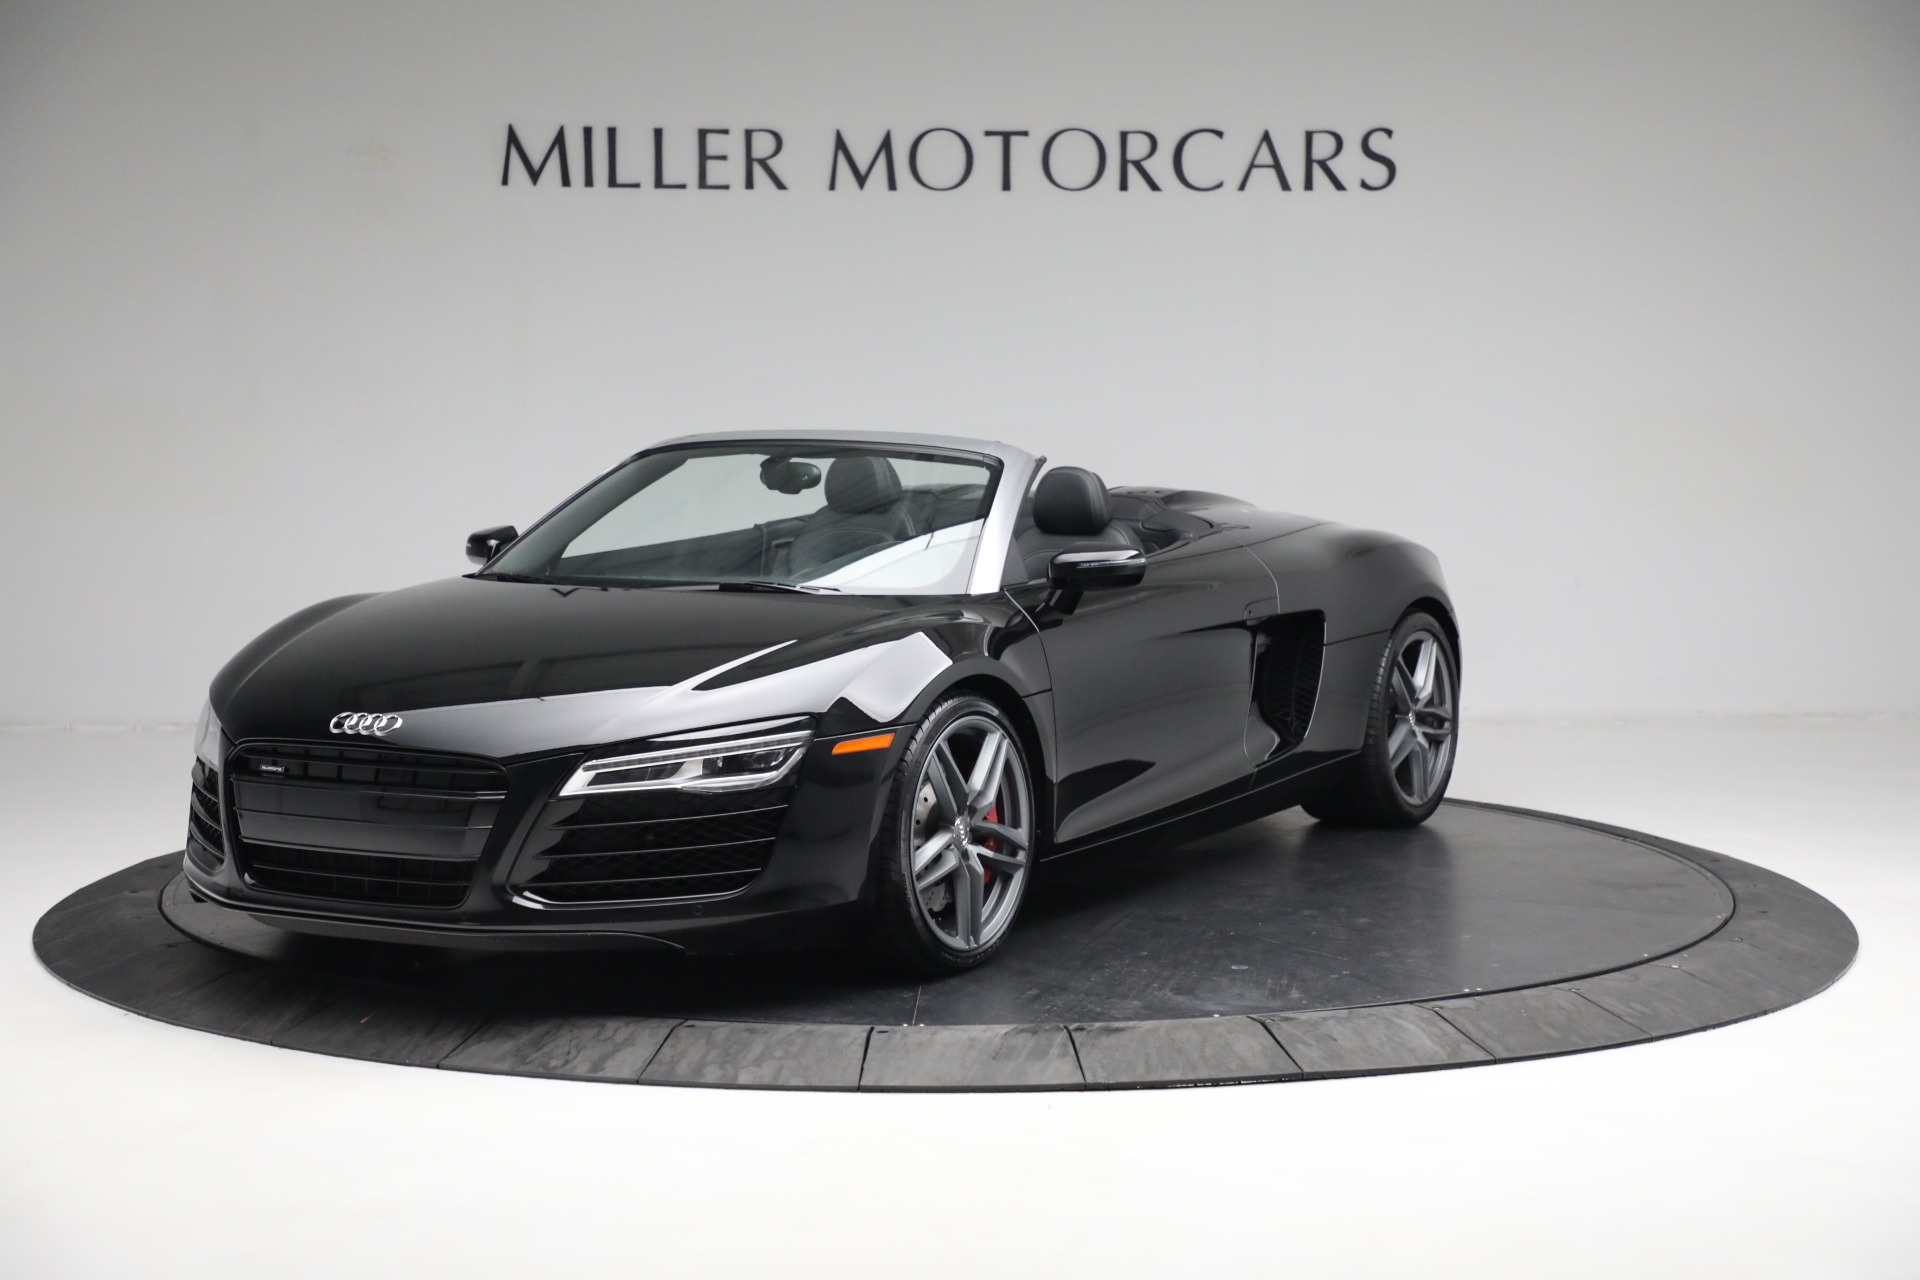 Used 2015 Audi R8 4.2 quattro Spyder for sale $109,900 at Pagani of Greenwich in Greenwich CT 06830 1